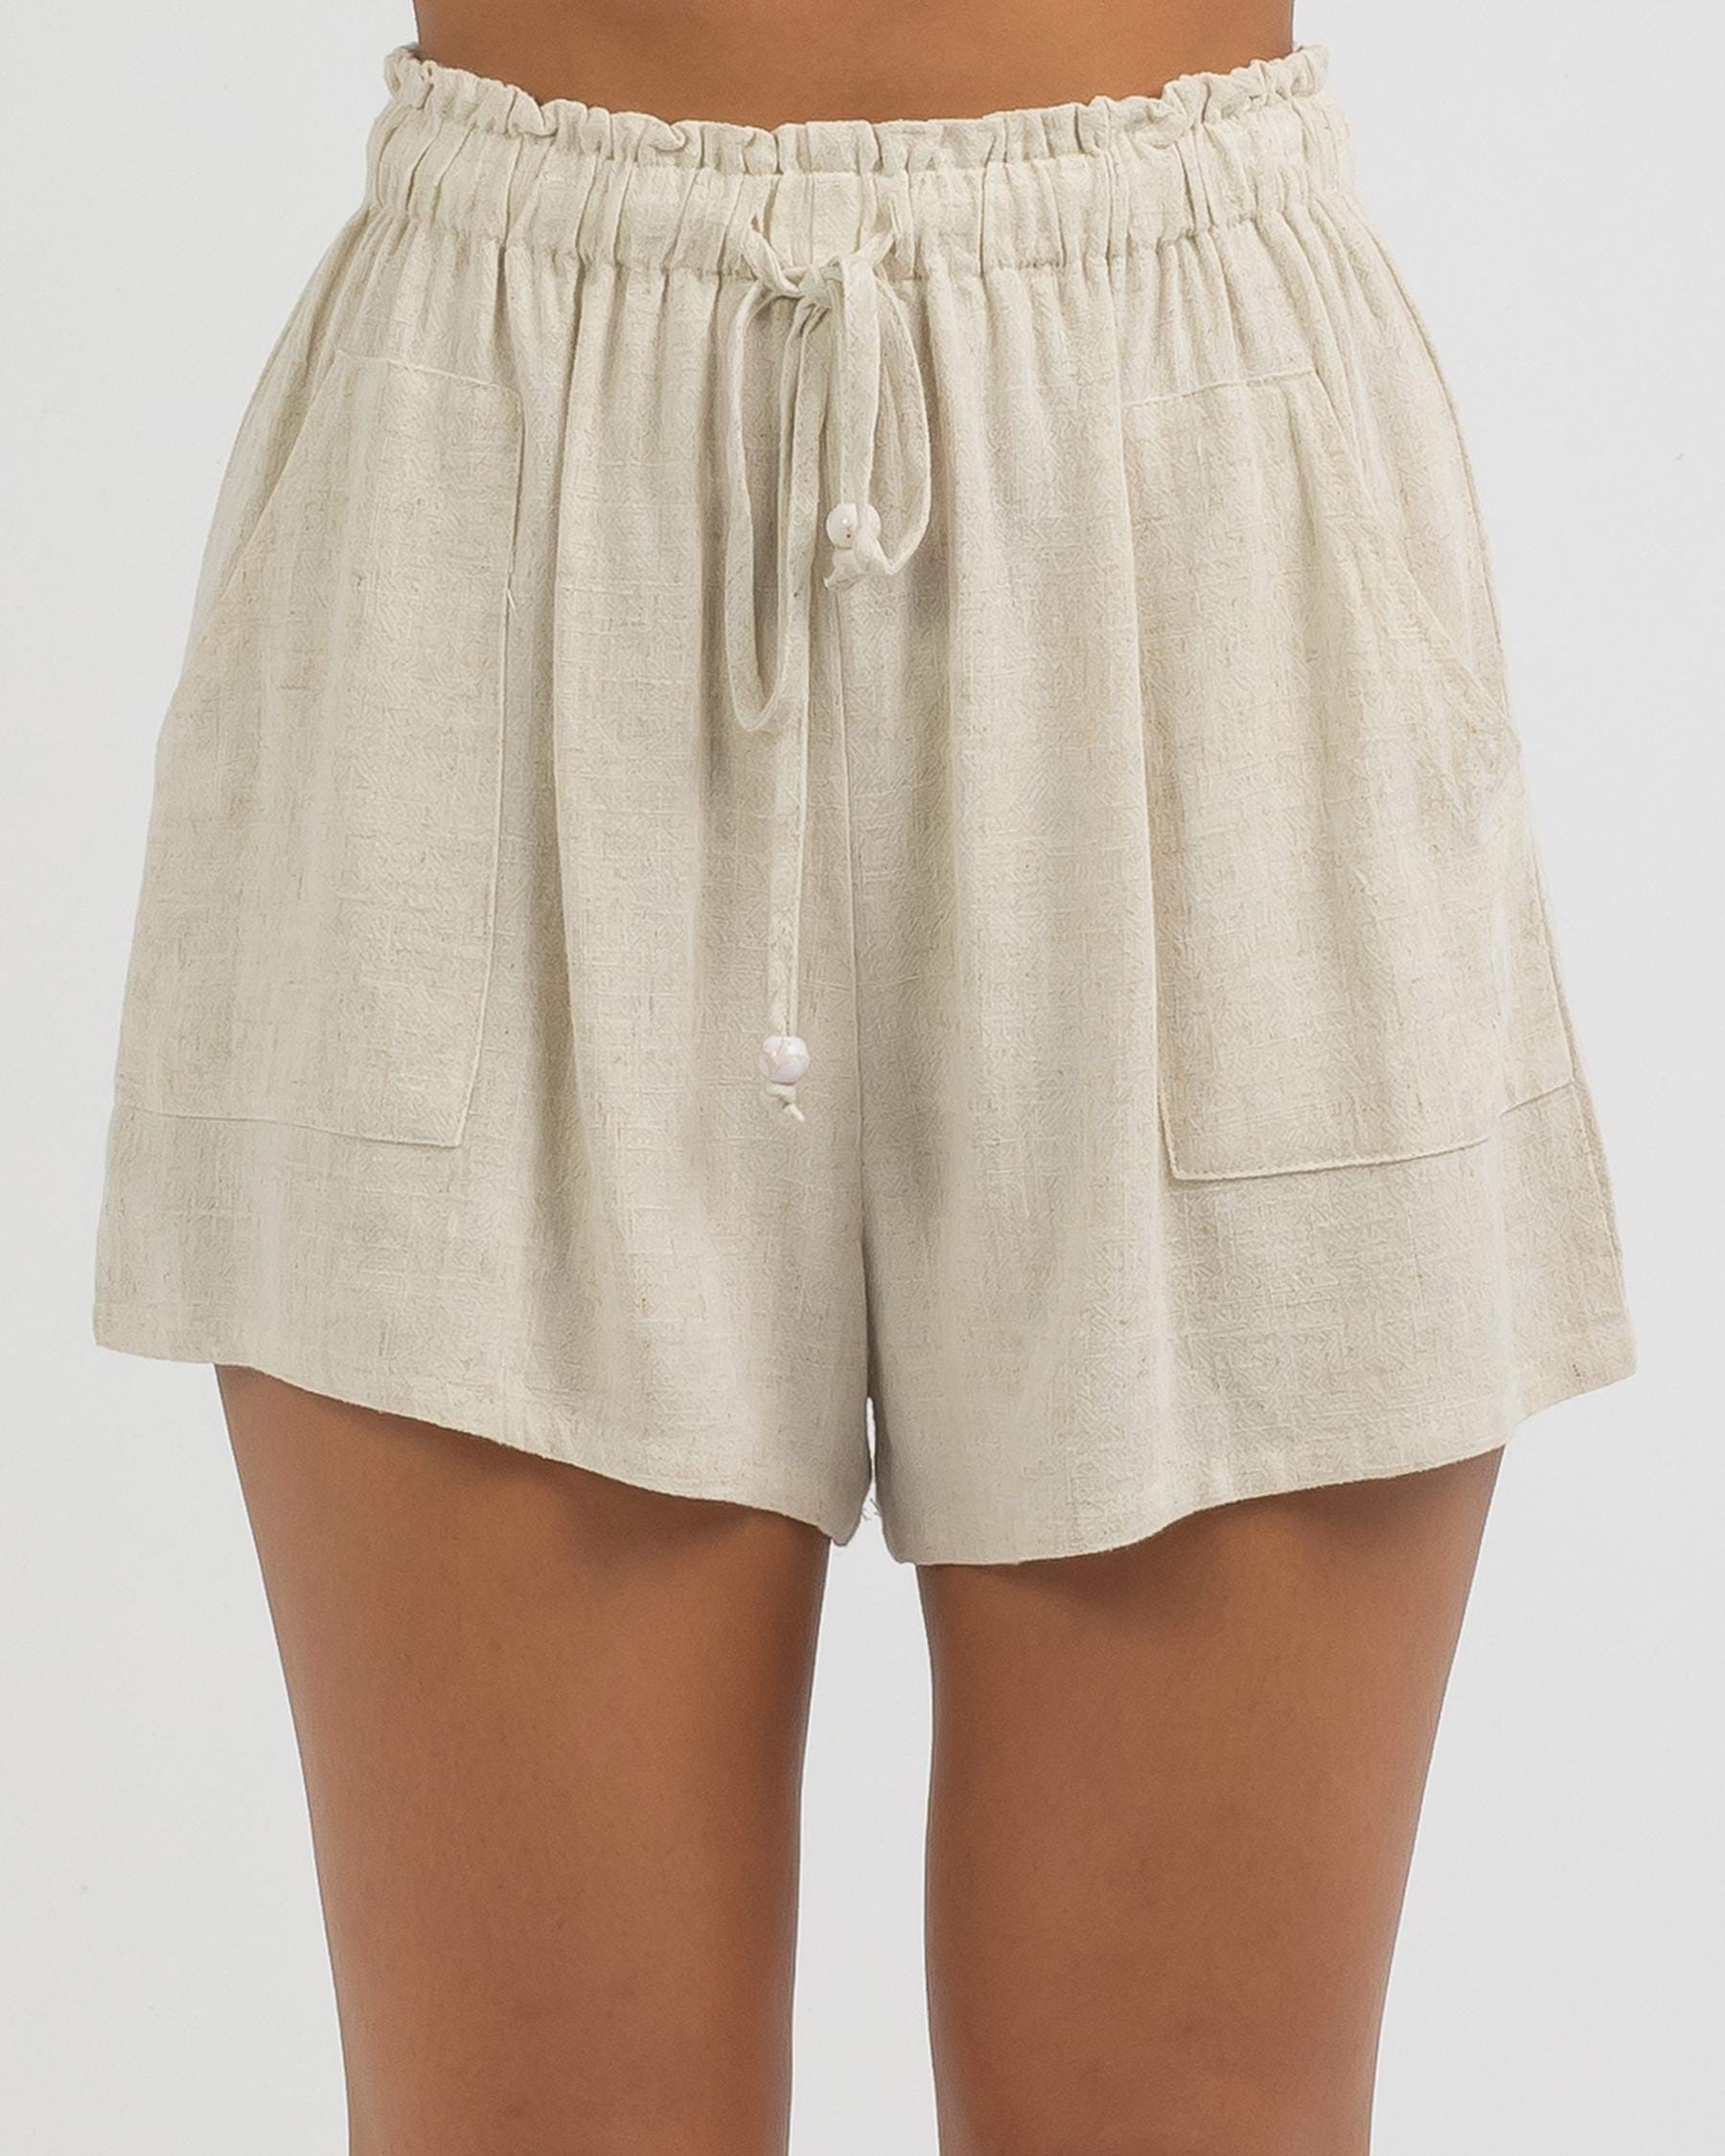 Yours Truly Brandi Shorts In Beige - Fast Shipping & Easy Returns ...